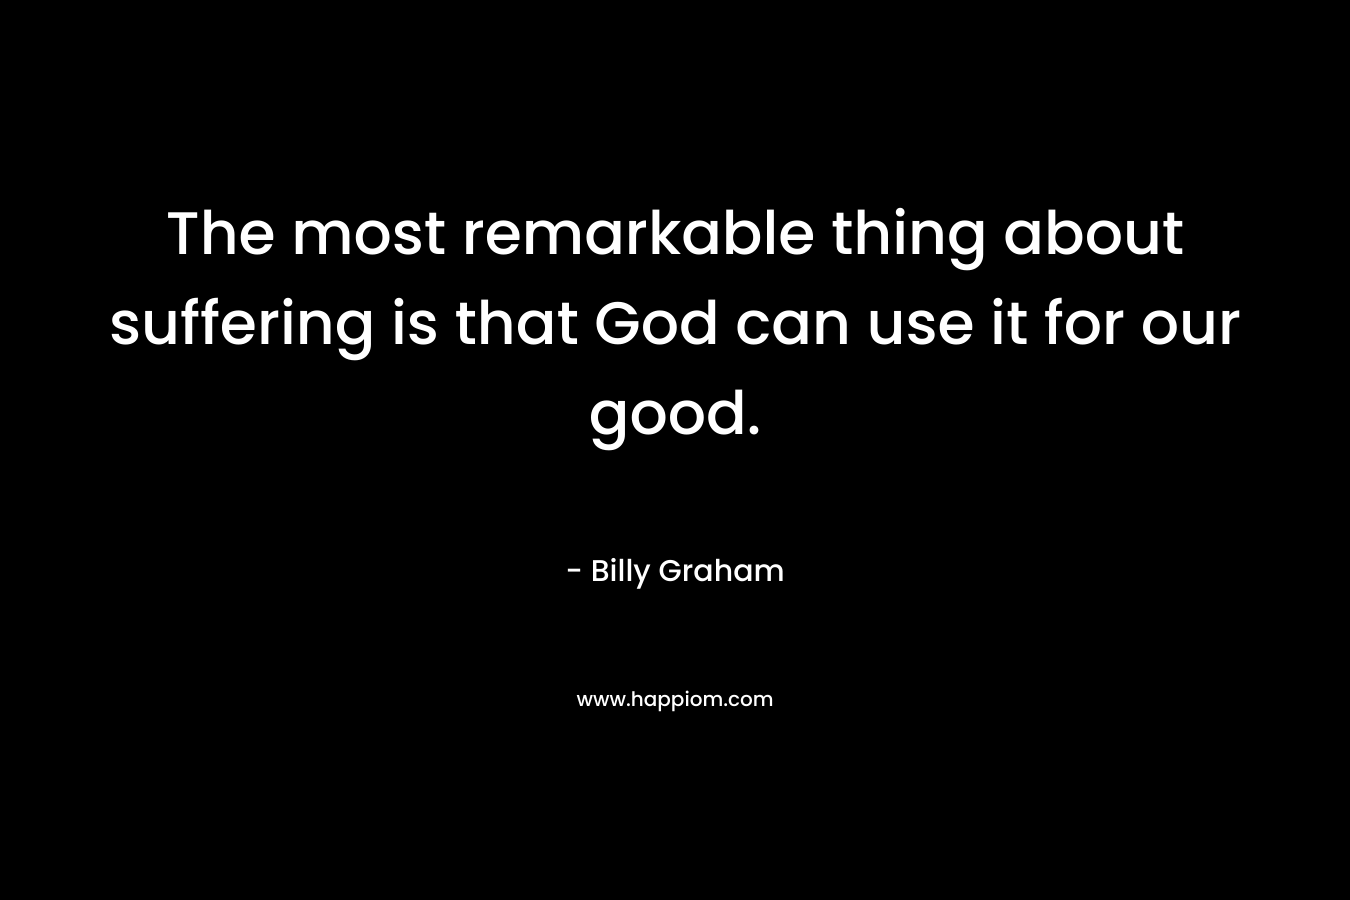 The most remarkable thing about suffering is that God can use it for our good.